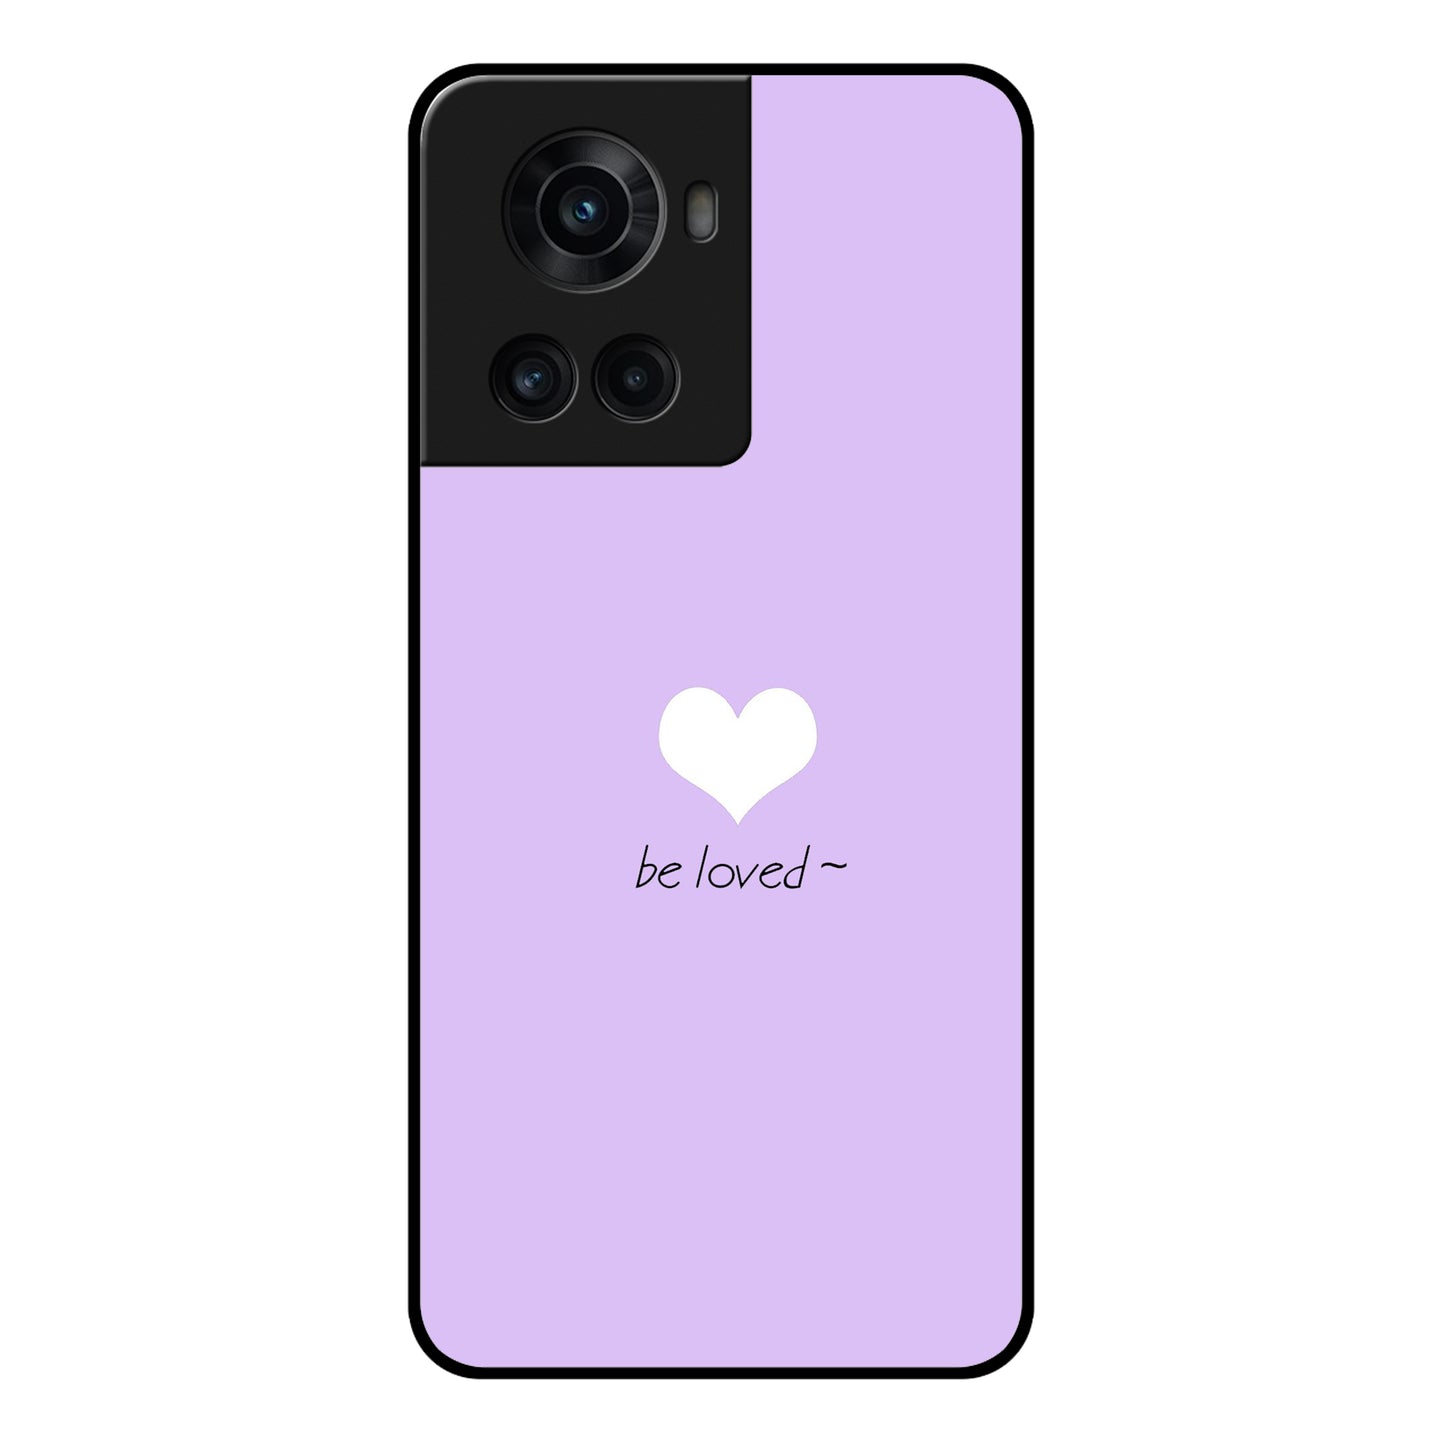 Be loved Glossy Metal Case Cover For OnePlus